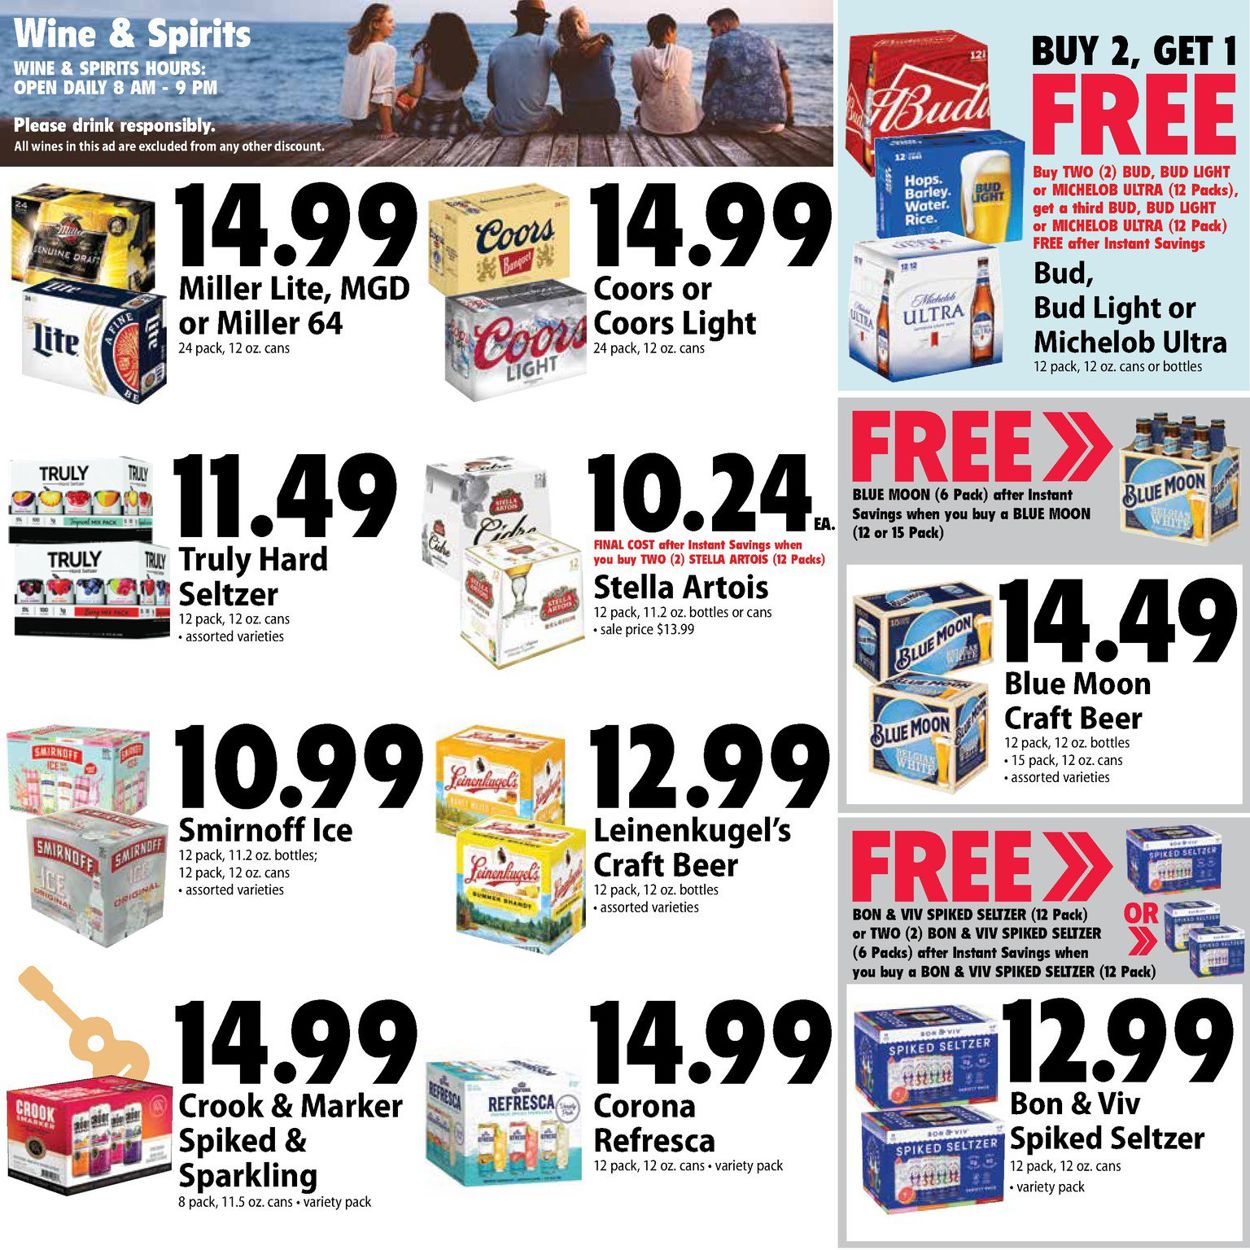 Festival Foods Current weekly ad 08/28 09/03/2019 [13]